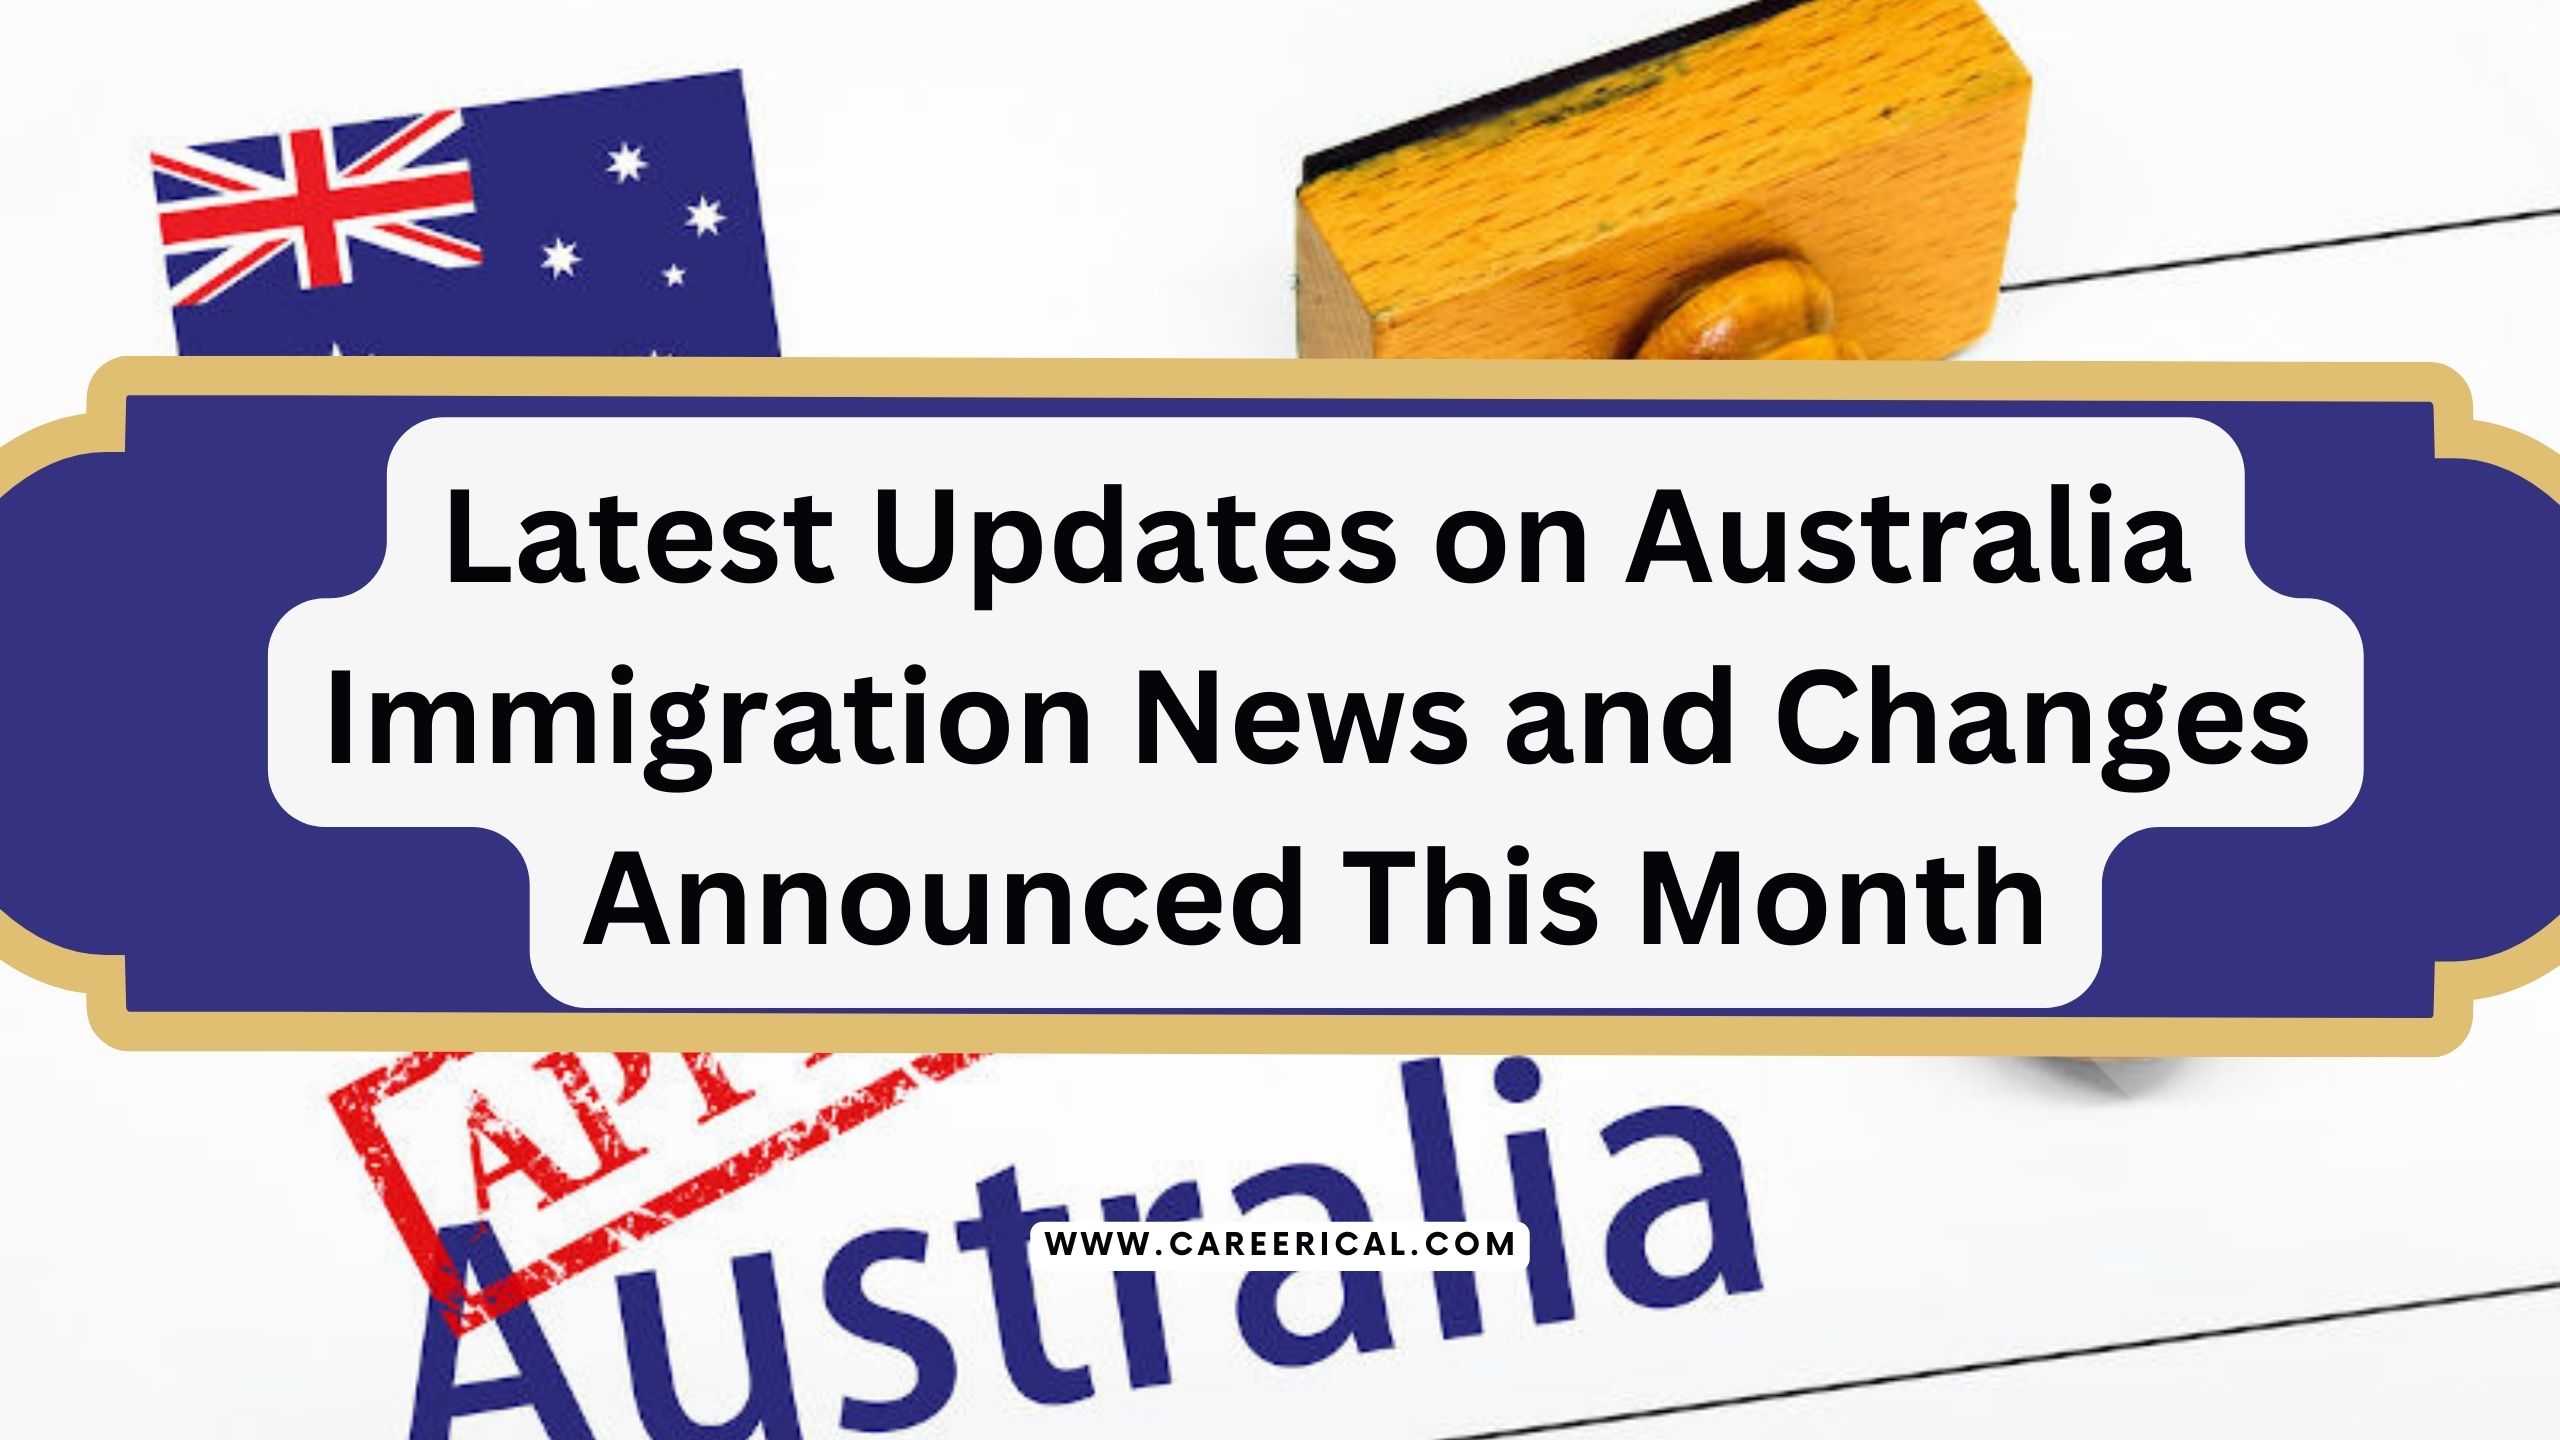 Latest Updates on Australia Immigration News and Changes Announced This Month